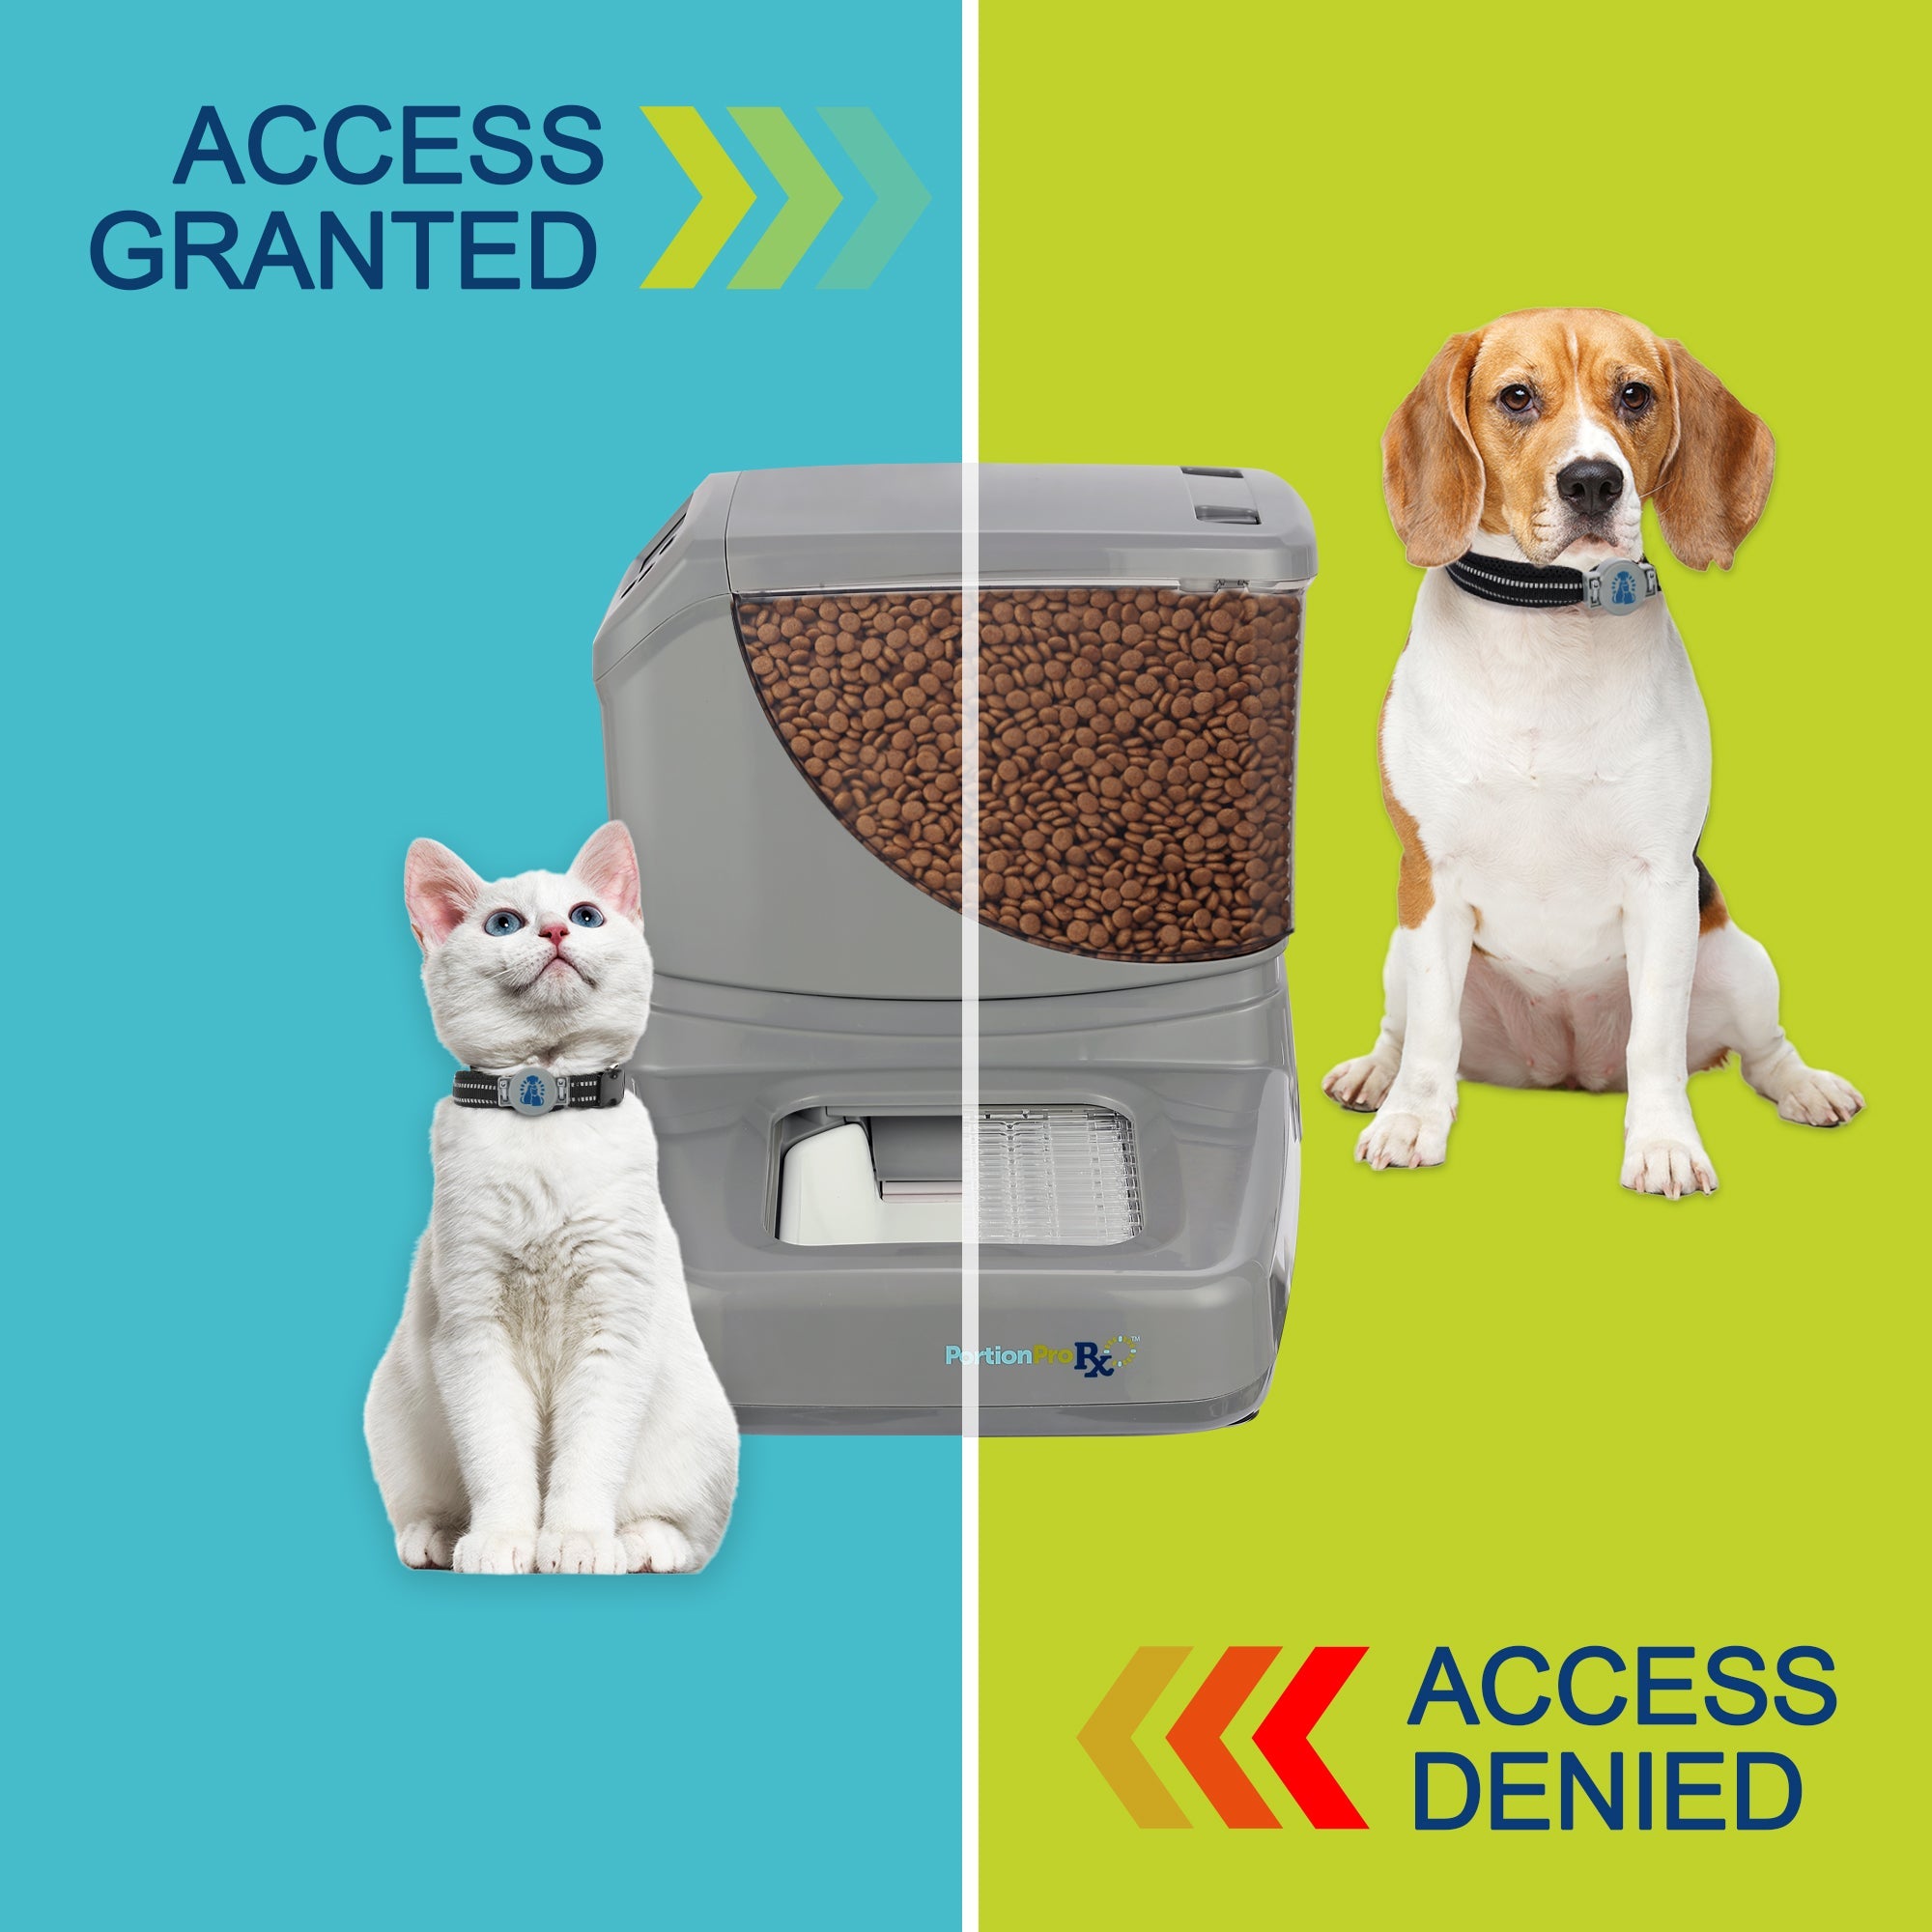 RFID pet feeder that grants access to designated pet for tracking pets diet